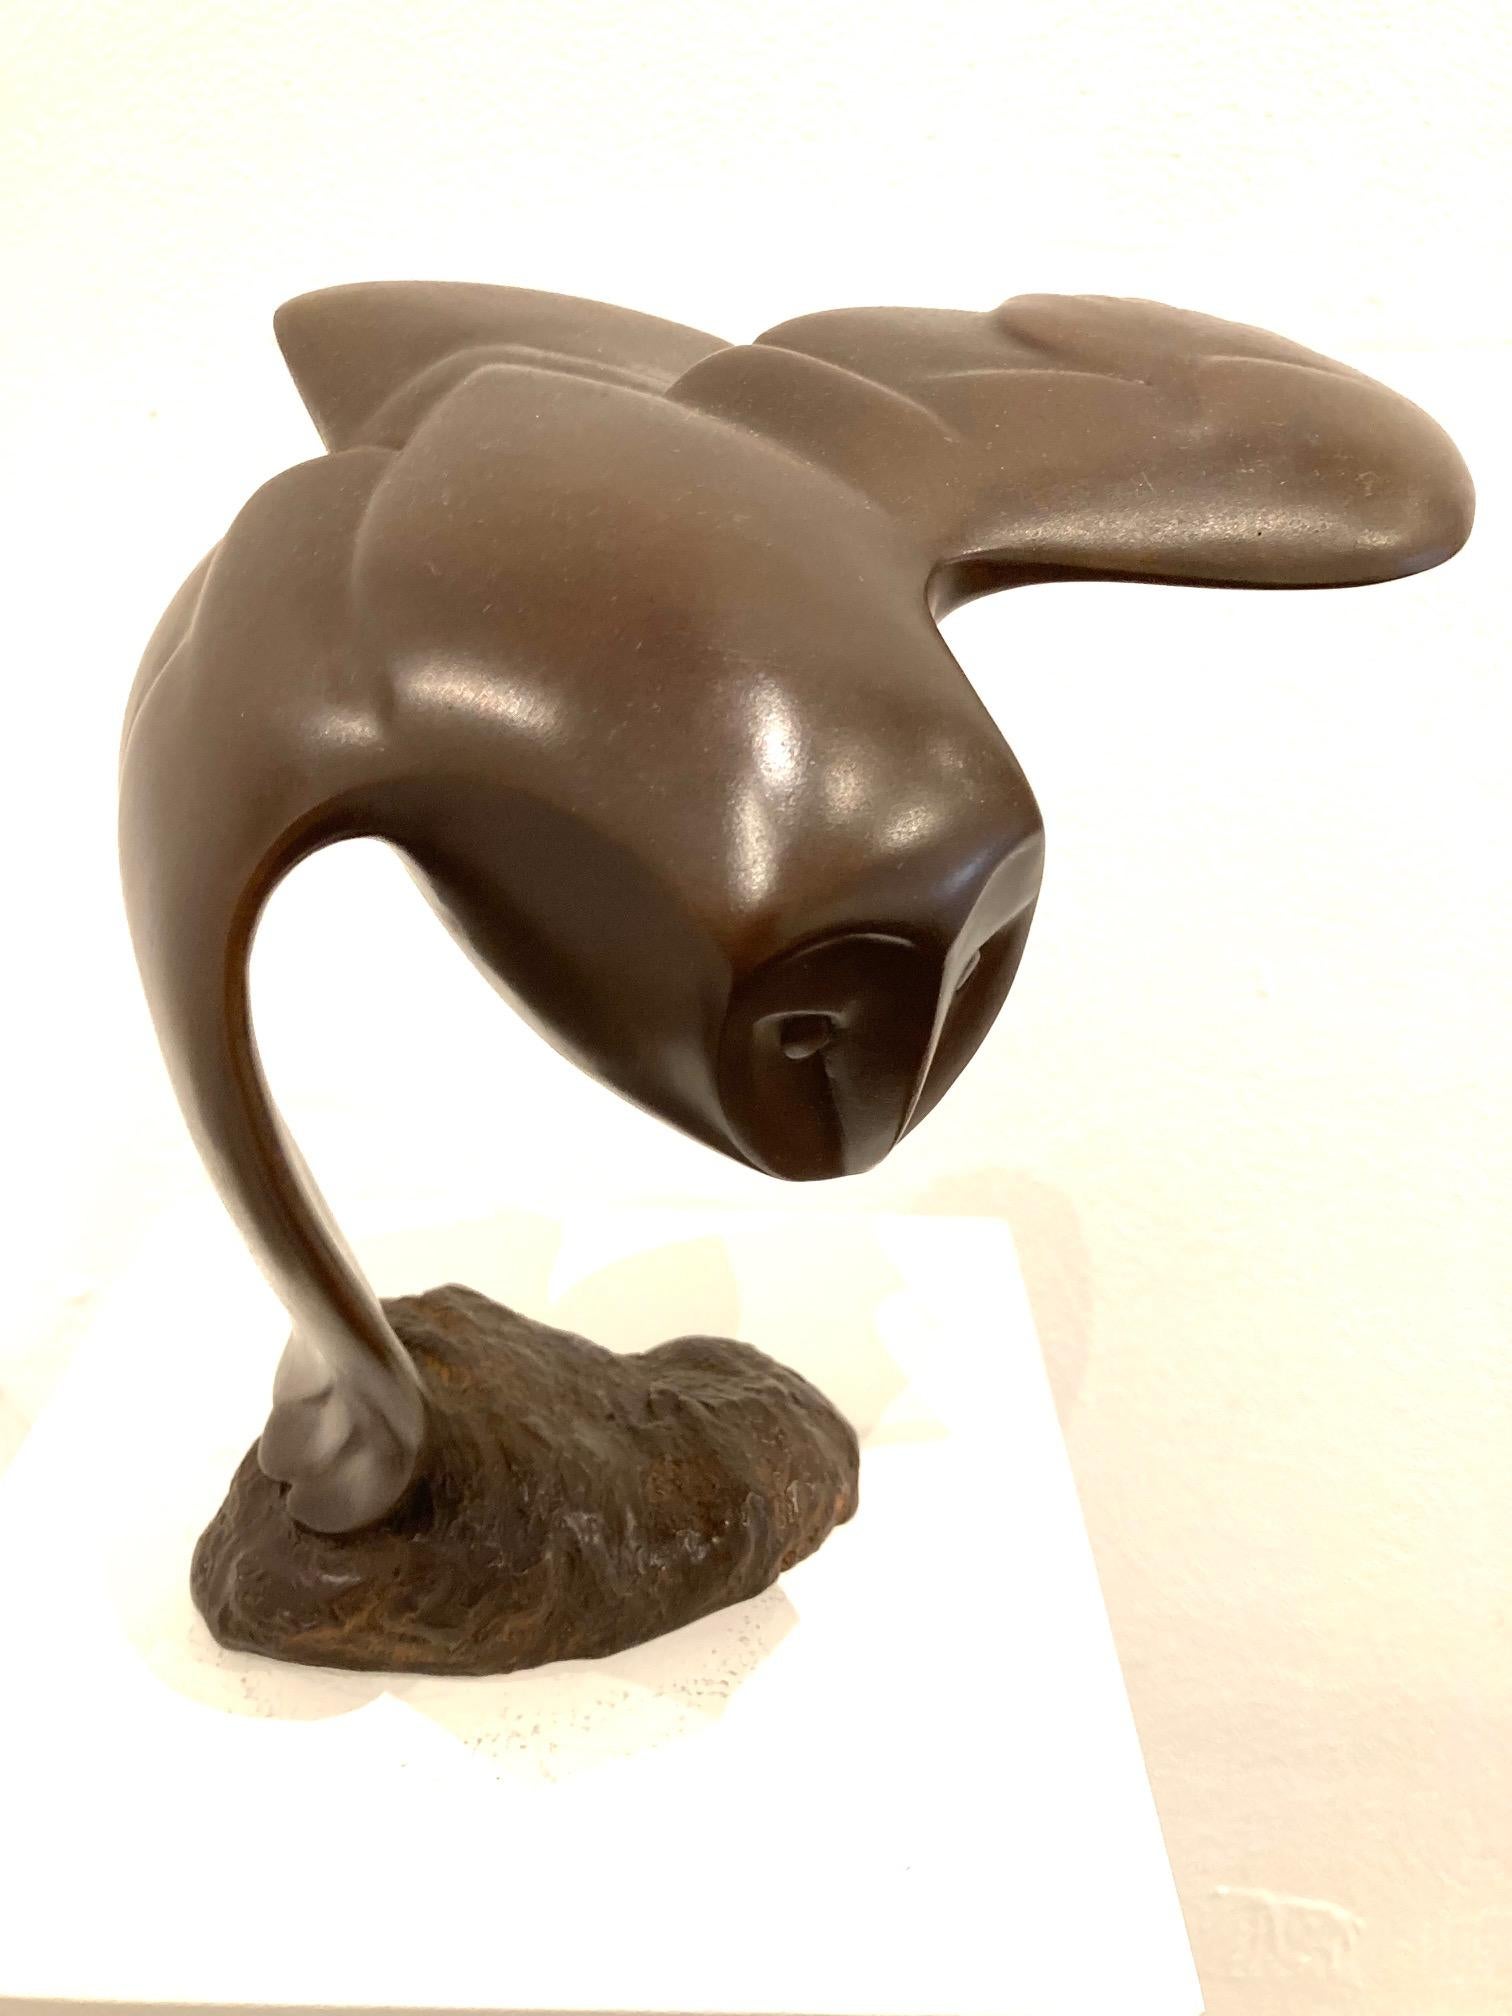 Vliegen Uiltje Bronze Sculpture Small Flying Owl Bird Animal In Stock 

Evert den Hartog (born in Groot-Ammers, The Netherlands in 1949) followed his education to be a sculptor at the Rotterdam Academy of Visual Arts. In the years 1971-1976 his